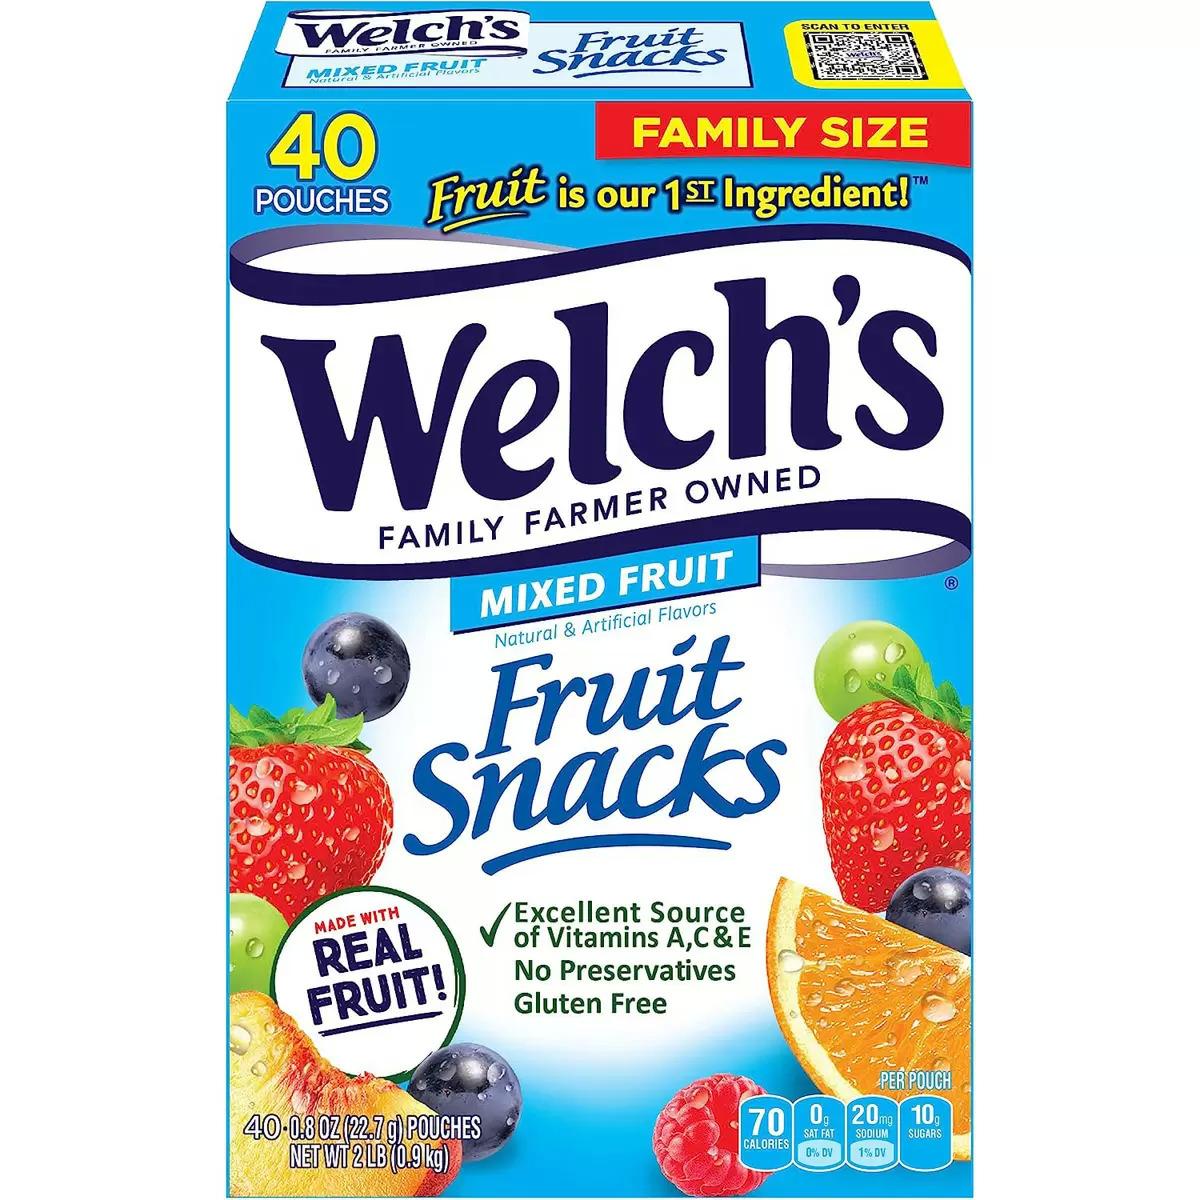 Welchs Mixed Fruit Snacks 40 Pack for $6.32 Shipped